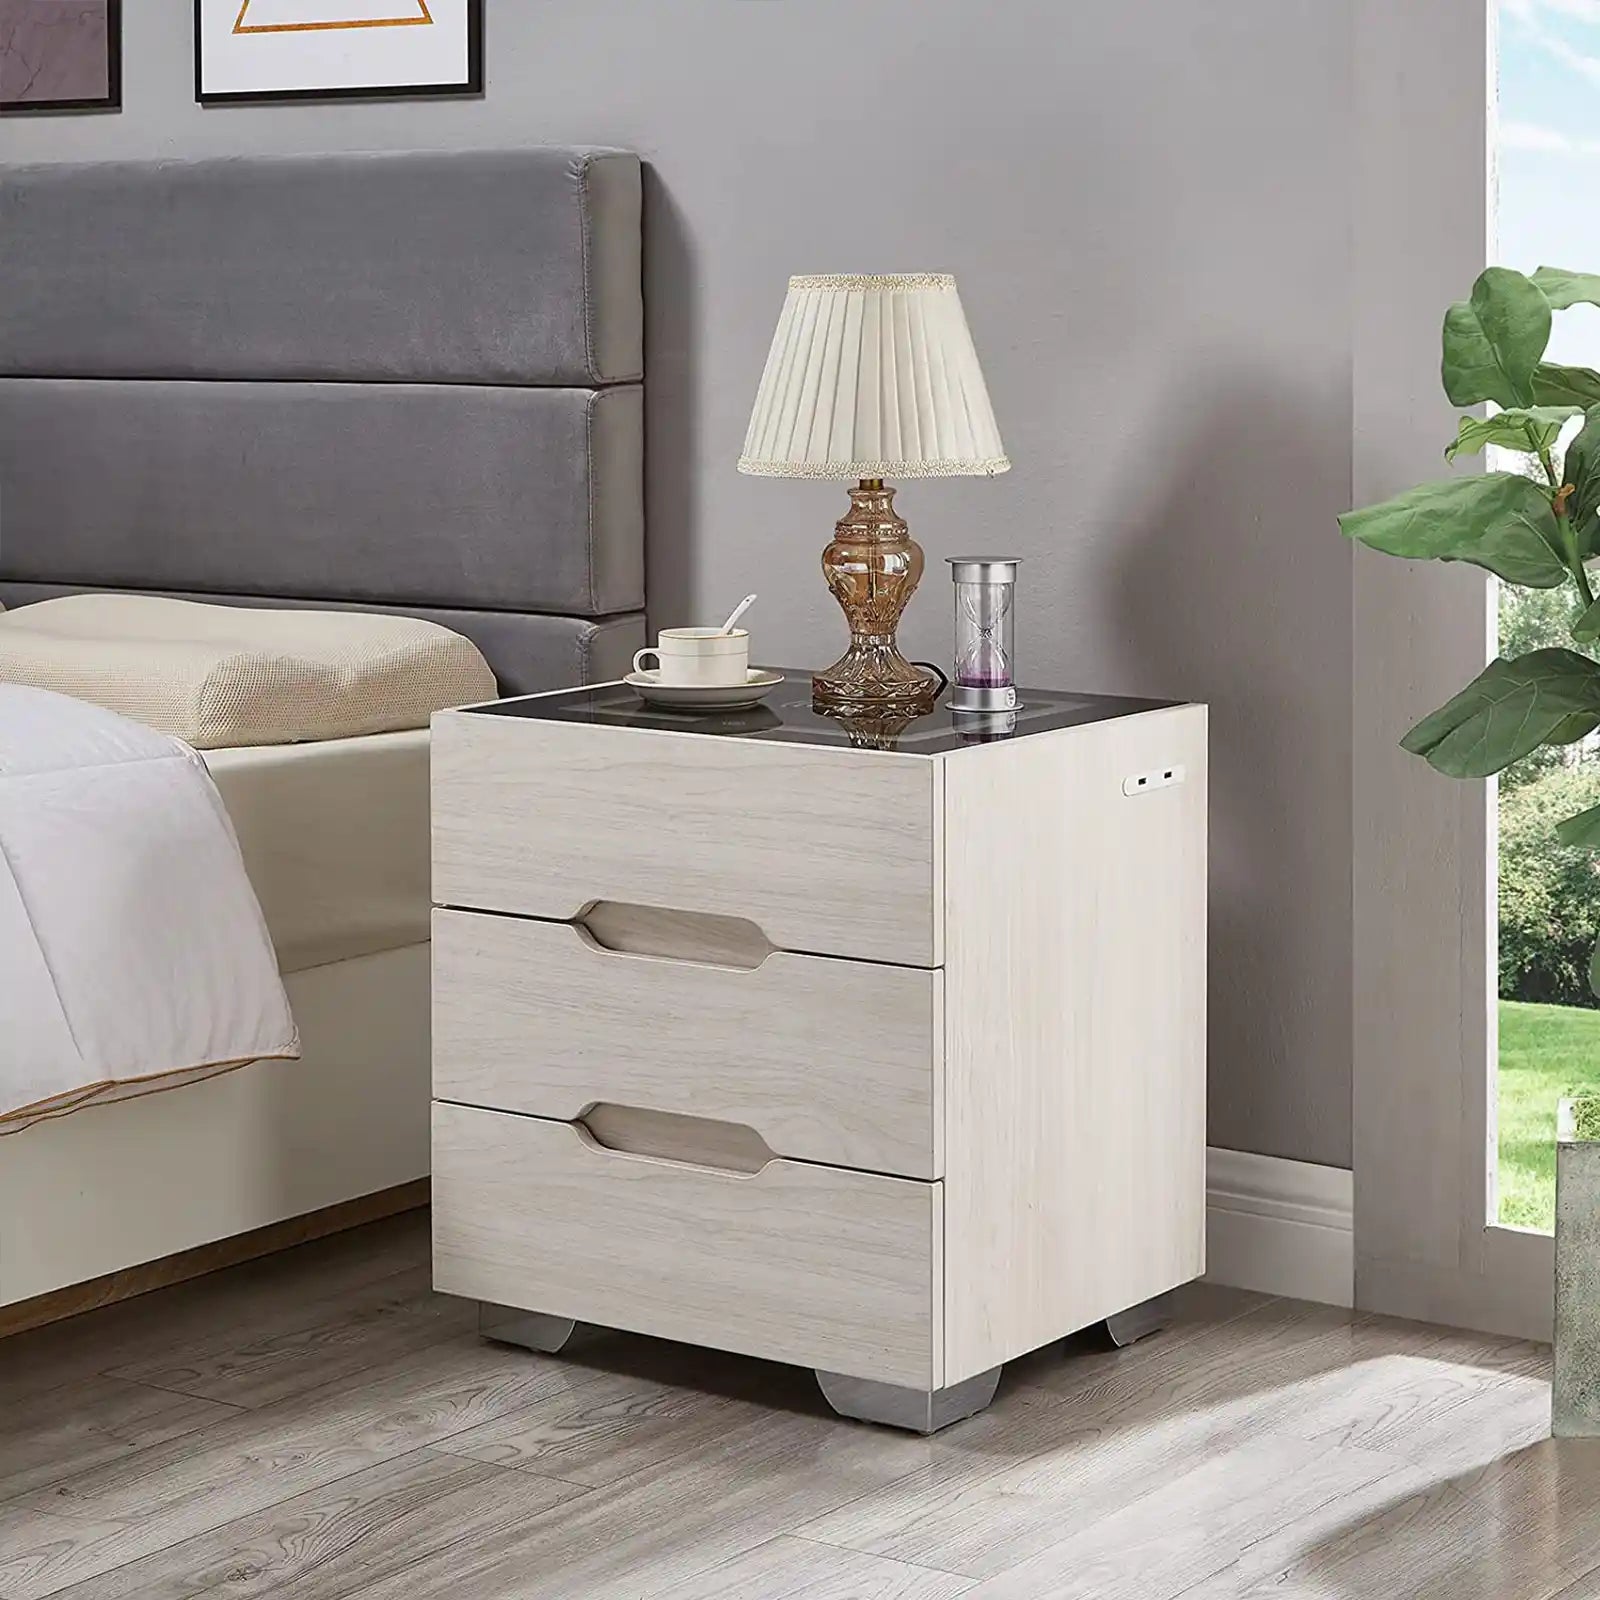 Nightstands Wireless Charging Station and LED Lights, Modern End Side Table with 3 Drawer Nightstand Storage Cabinet for Bedroom